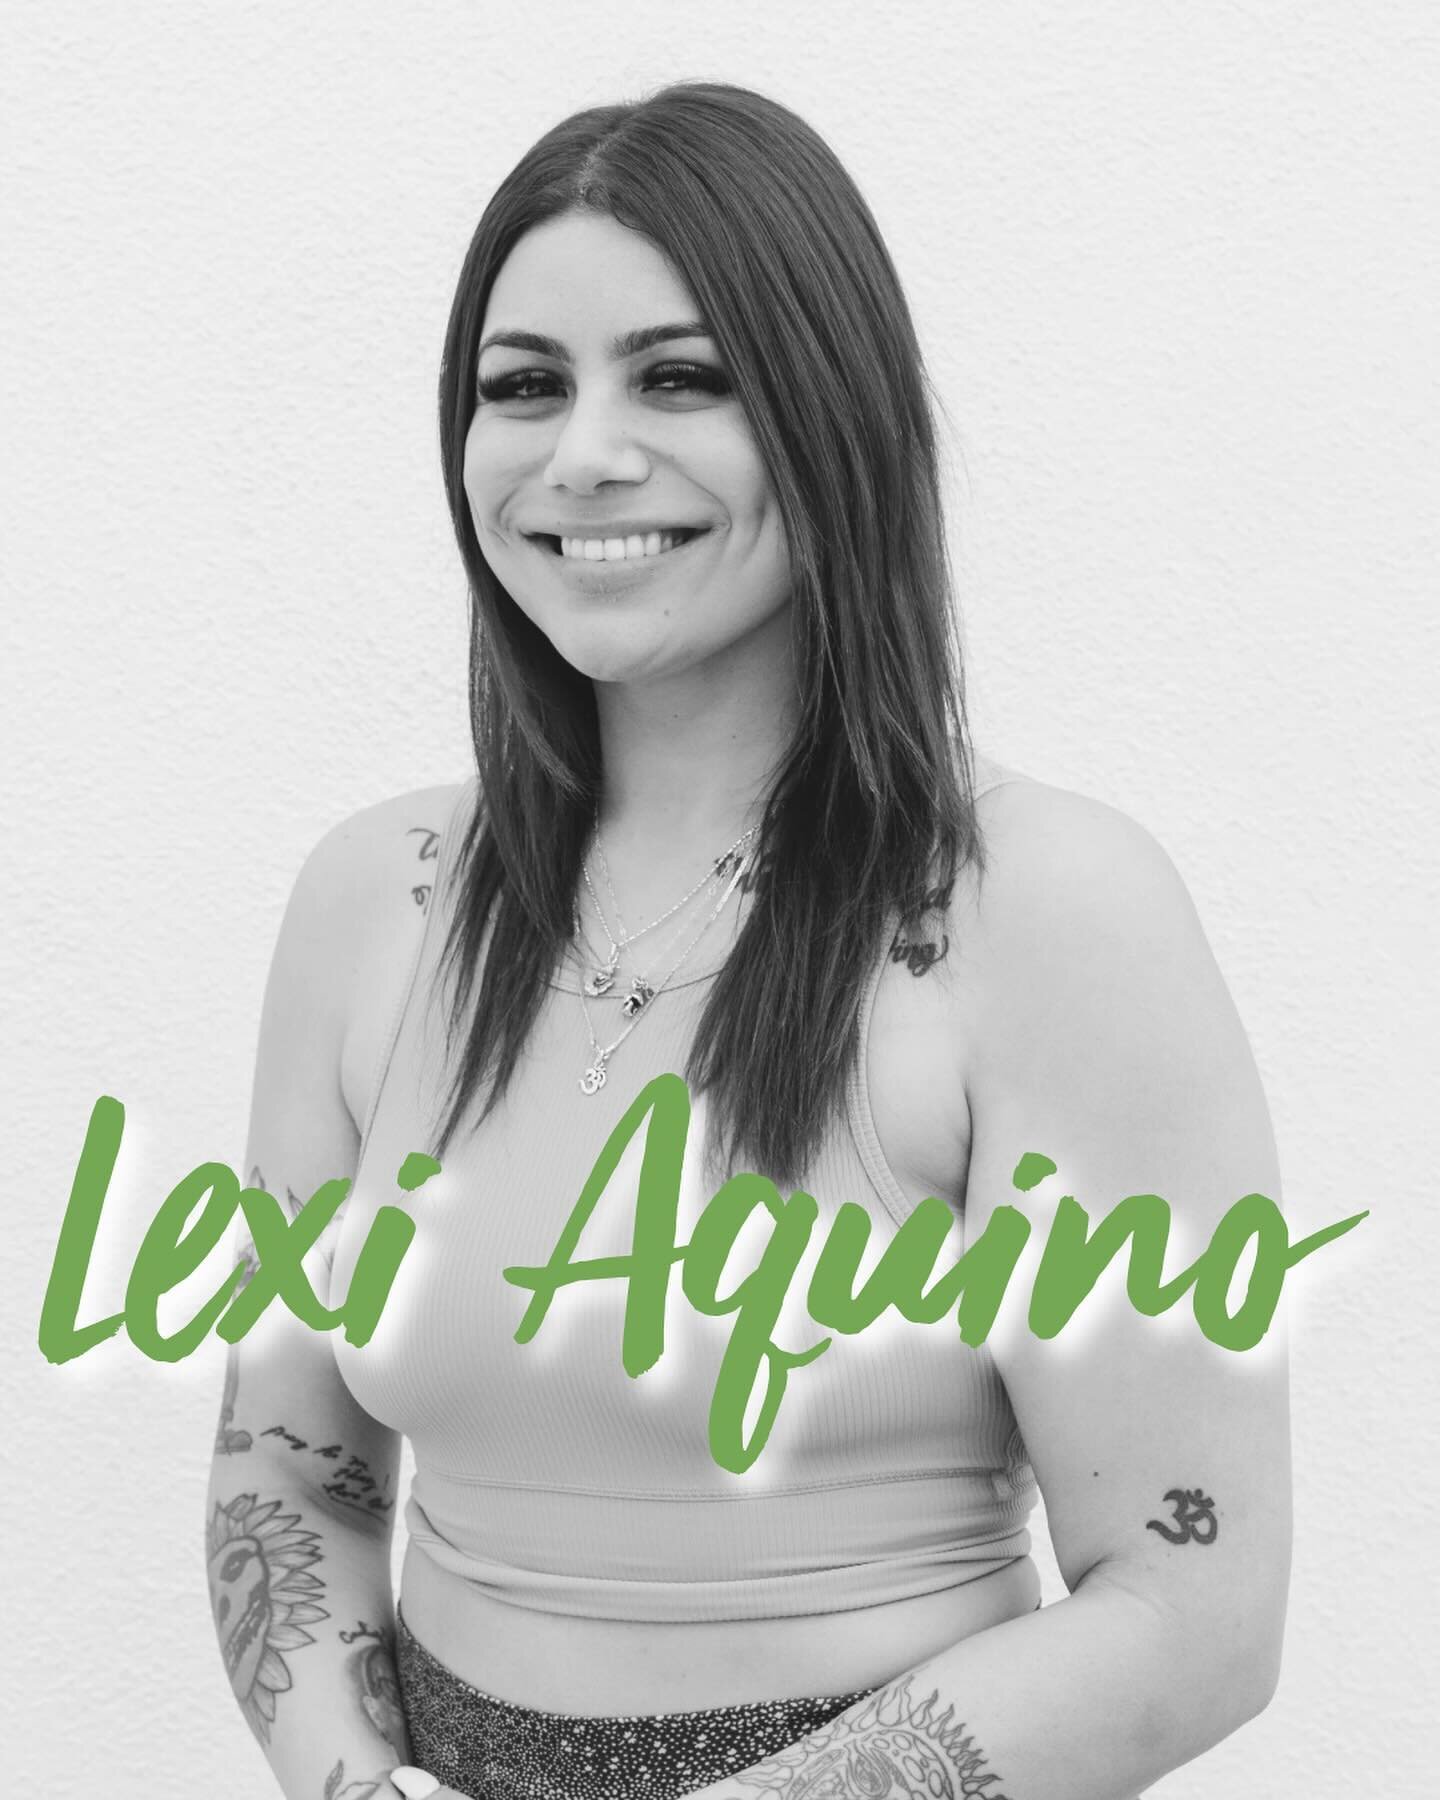 👋🏼 Say hello to Lexi Aquino! A Ventura native, Lexi is a teacher AND the retail supervisor for Grassroots! 🌿 @rosesaredeath 

Grassroots has been at the center of Lexi&rsquo;s yoga journey from the beginning. Her first introduction to yoga was tak